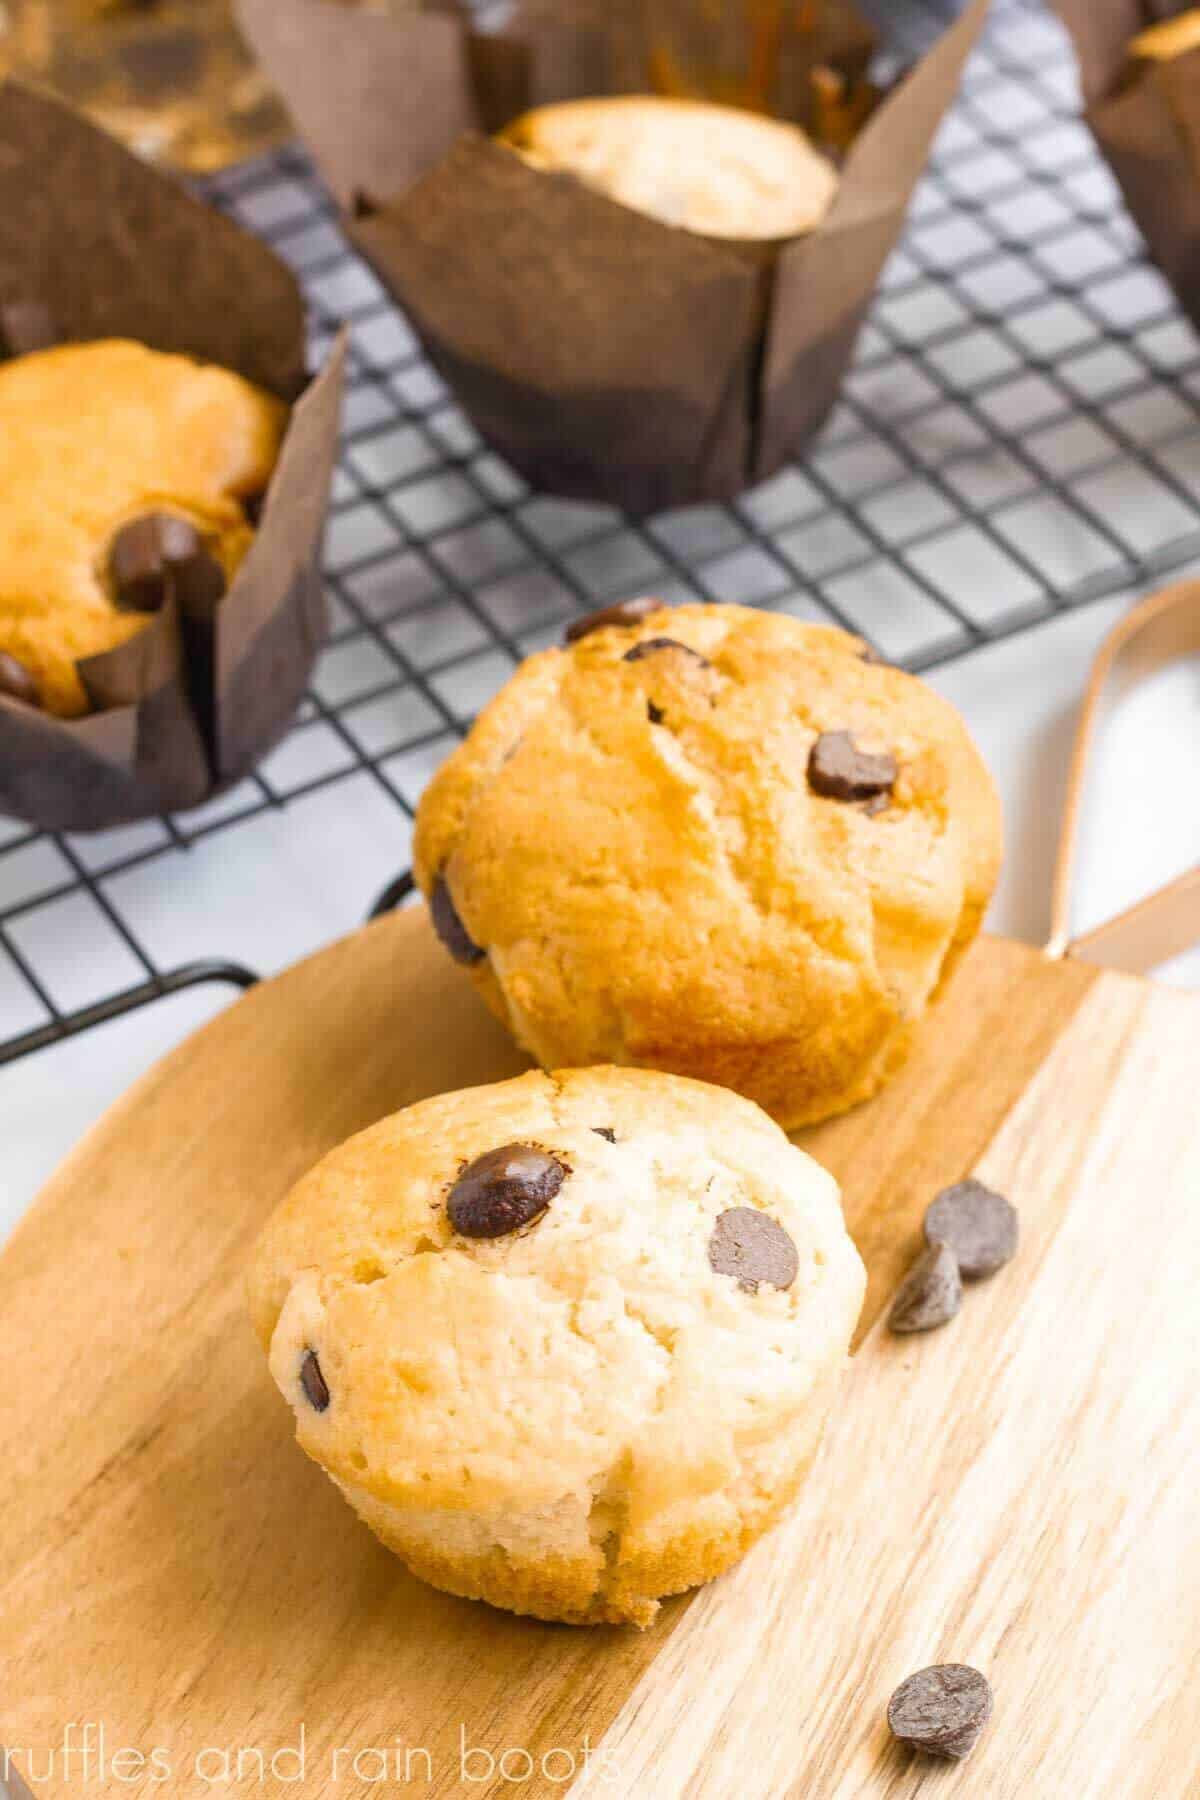 Vertical image of 2 chocolate chip muffins on a wood cutting board in front of muffins in paper wrappers on wire rack.